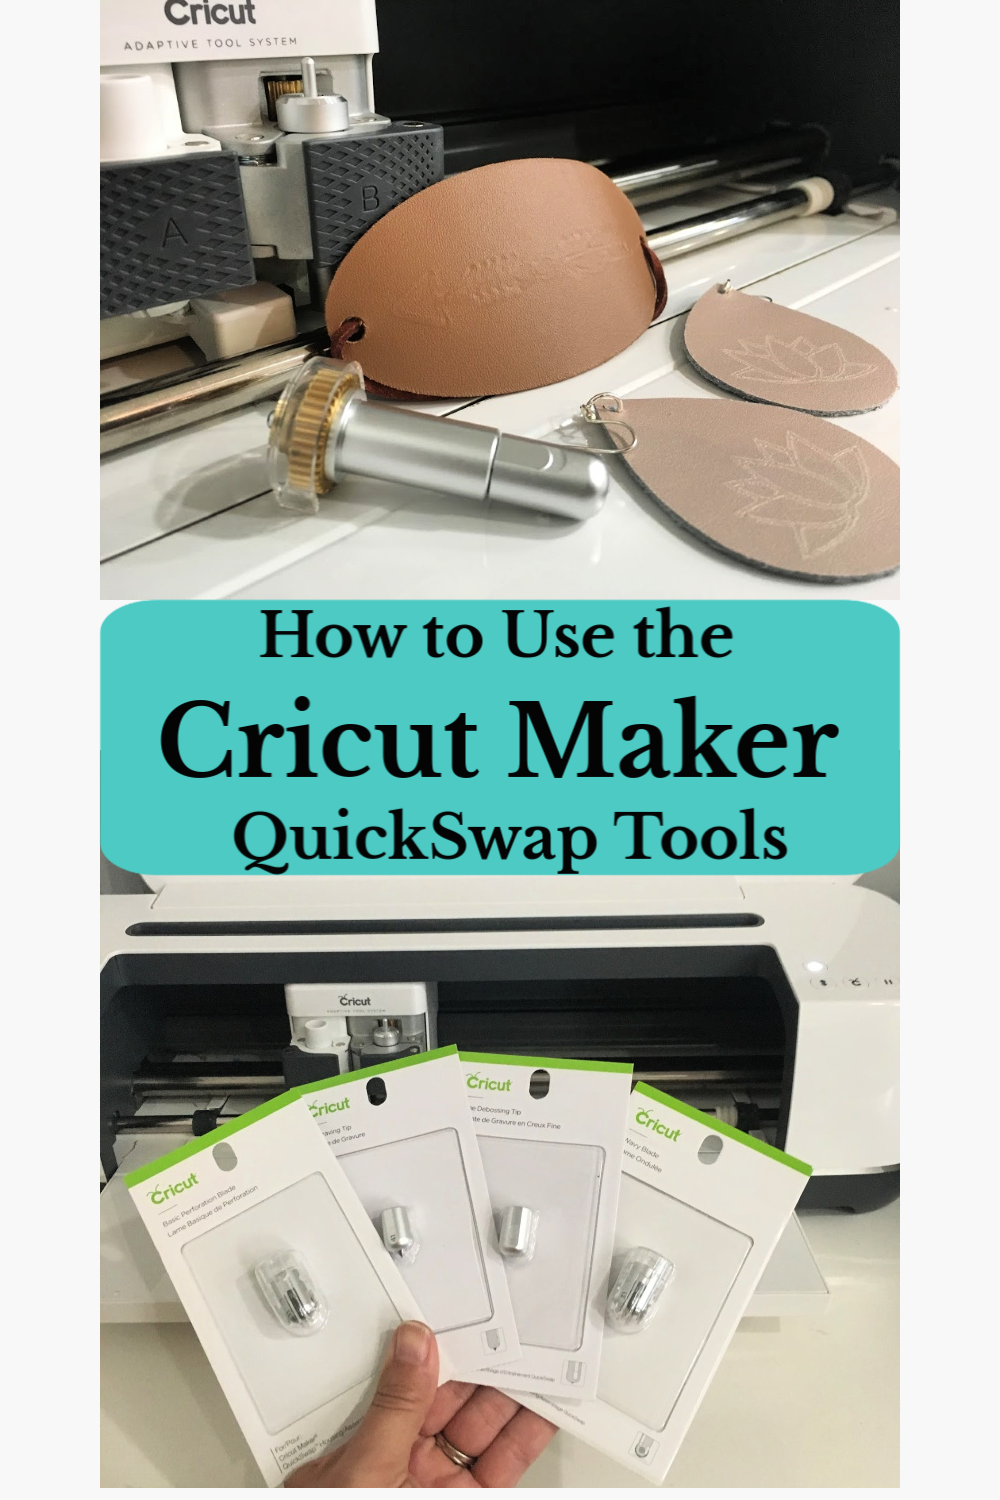 Real Girl's Realm: How to Use the Cricut Maker's QuickSwap Toolset